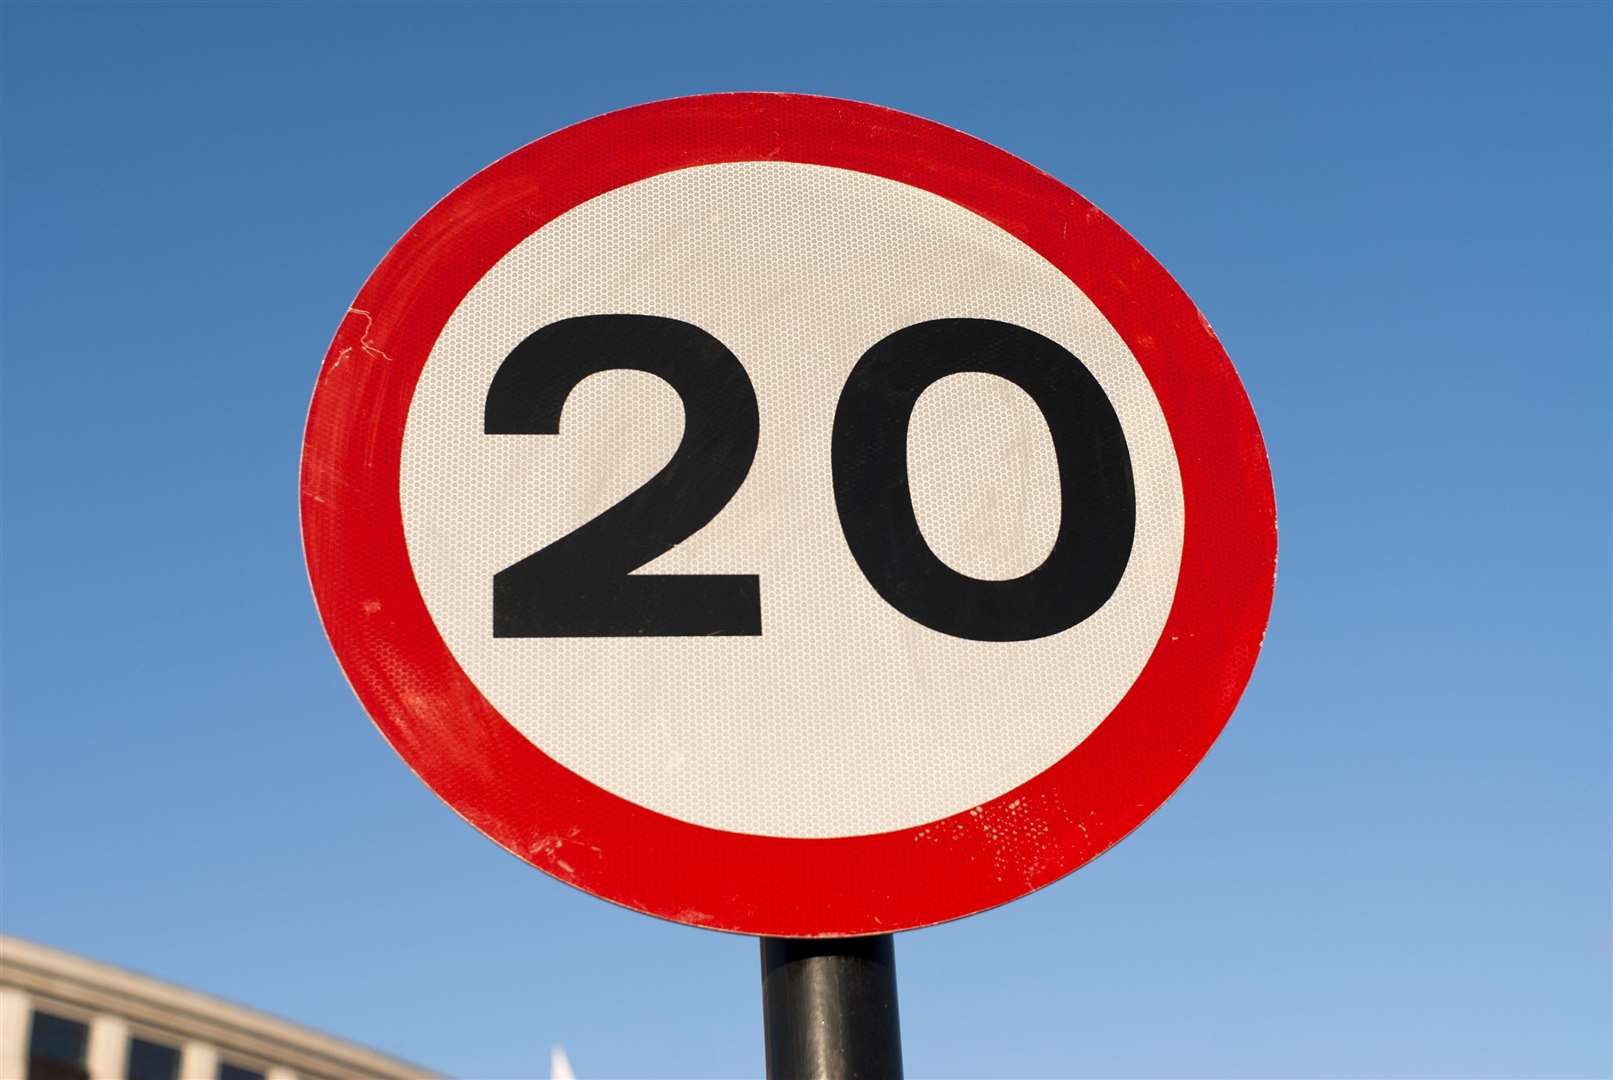 A mandatory 20mph speed limit was an option for Kintore's School Road.